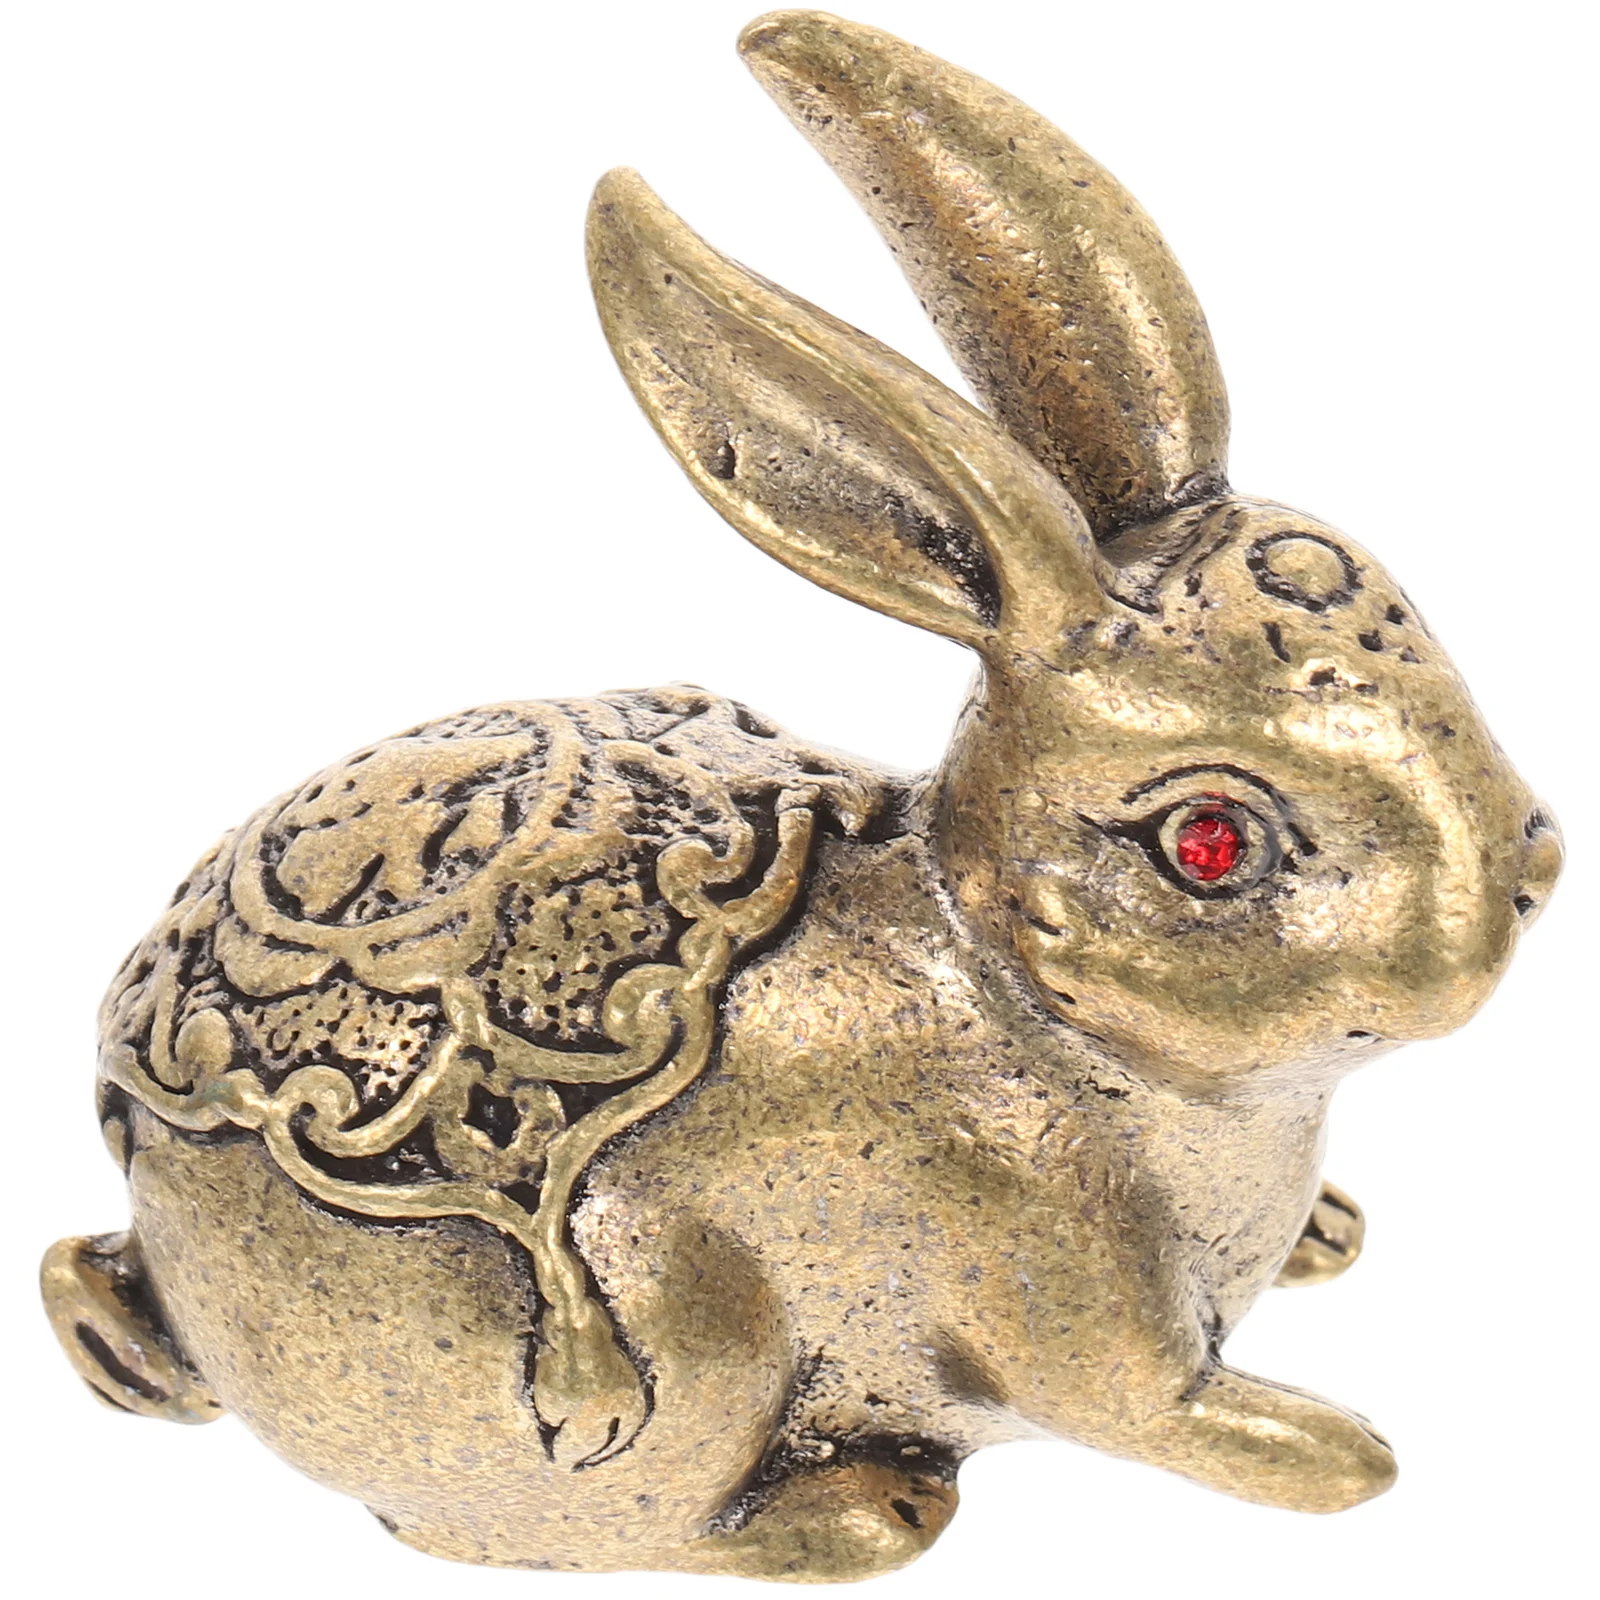 

Rabbit Bunny Statue Zodiac Figurine Figurines Year New Animal Chinese Decorations Decor Figure Statues Sculpture Tabletop